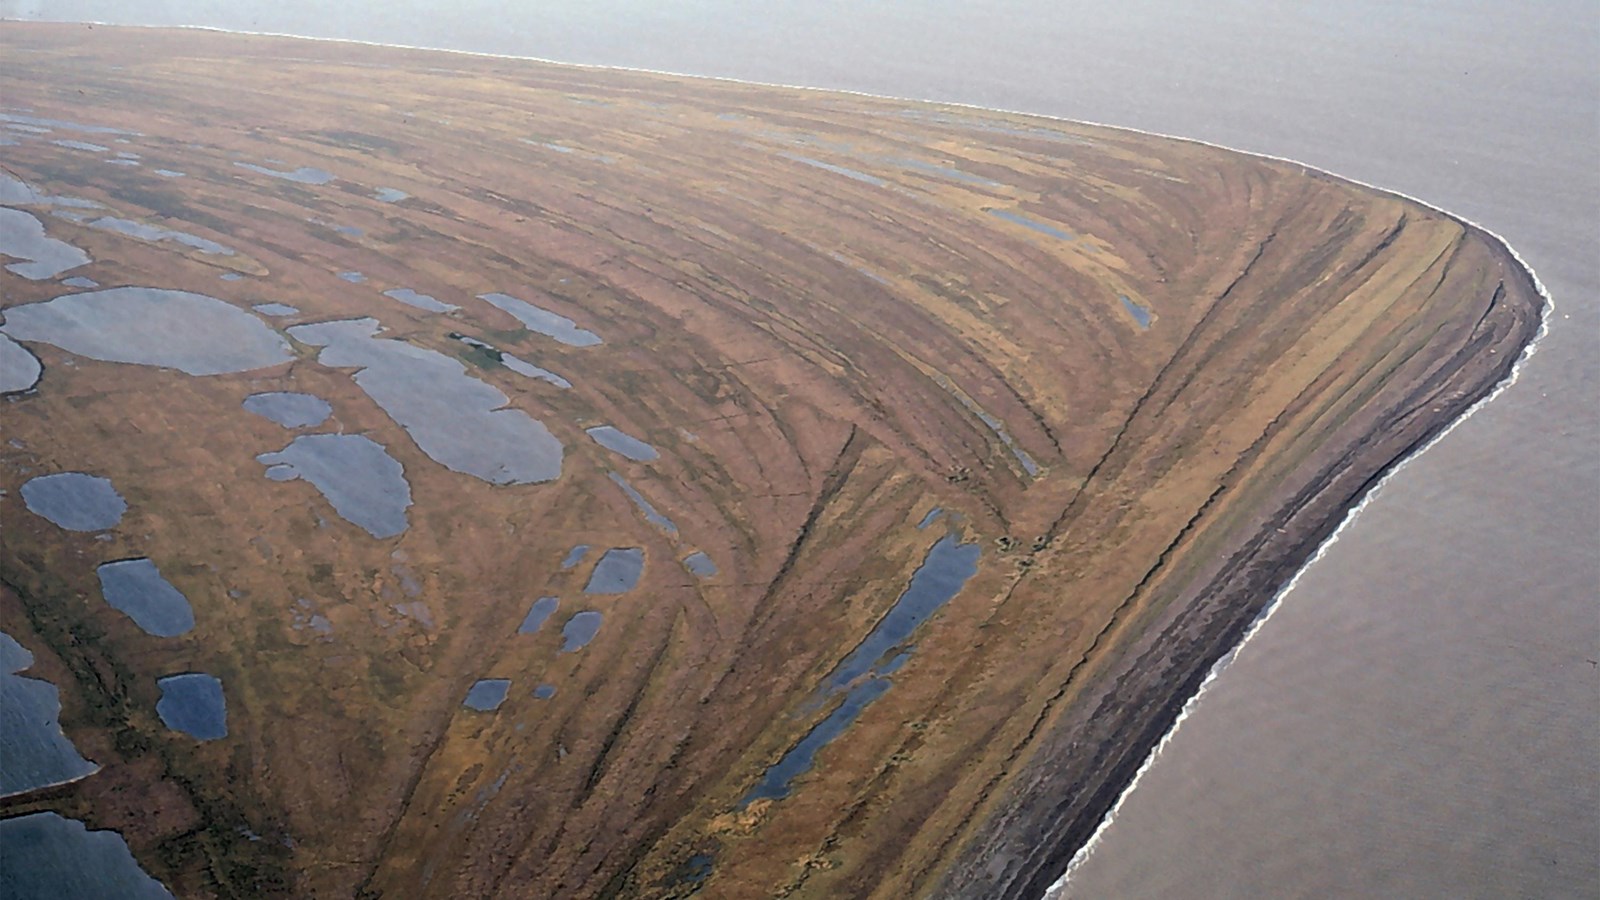 Aerial view of a cape with many beach ridges and pools of water